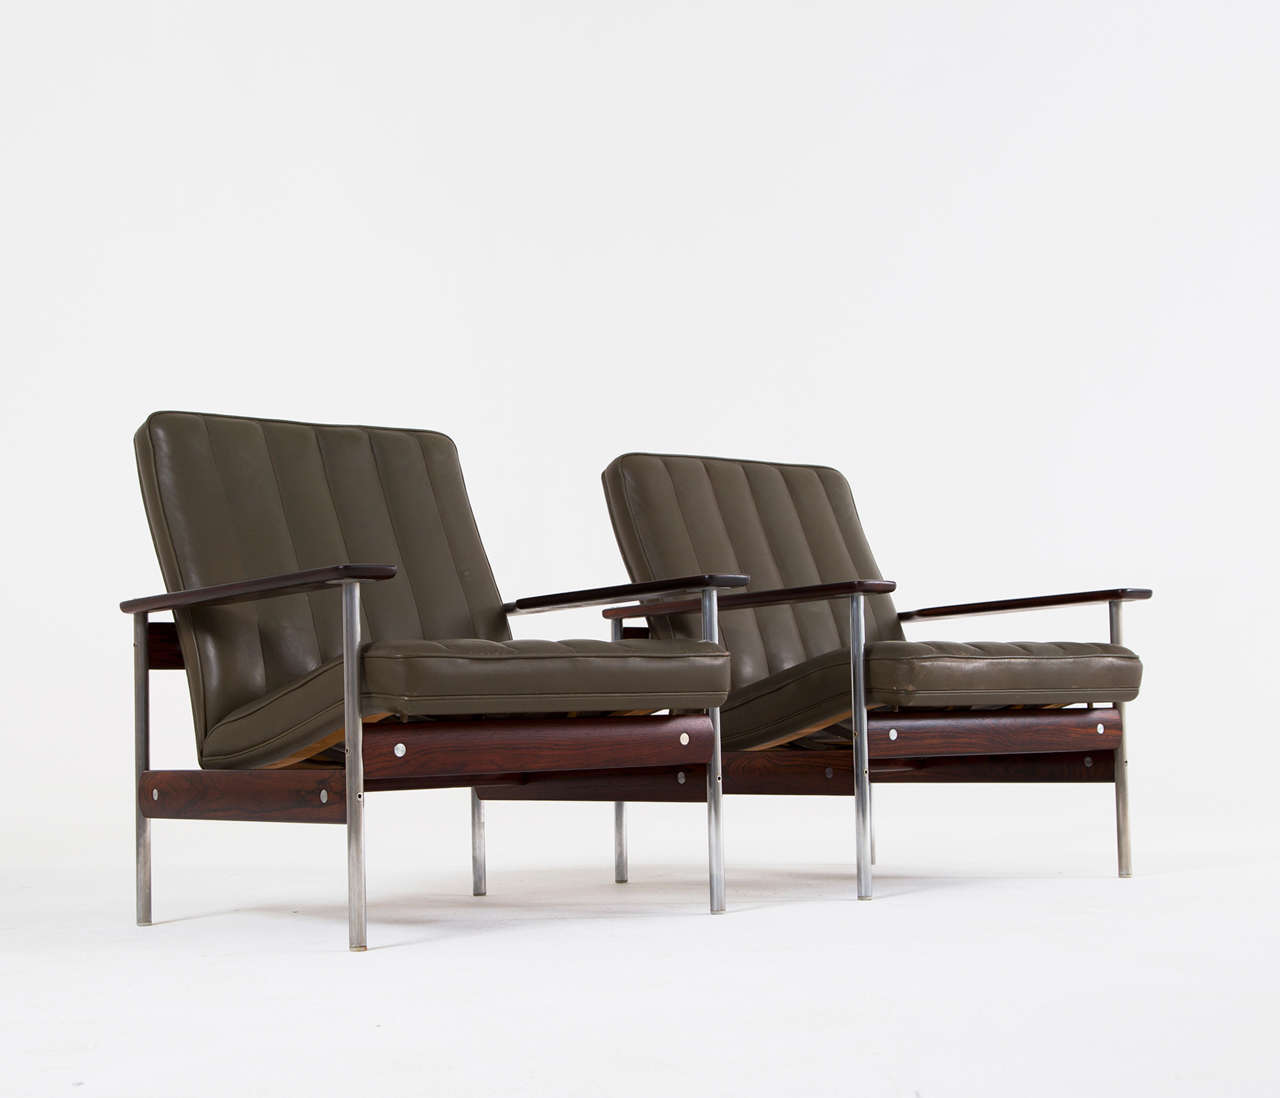 Very sophisticated pair of easy chairs by Sven Ivar Dysthe for Dokke Møbler, Norway, 1959. The base of these lounge chairs is made out of modular rosewood and stainless steel pieces. A clever design makes that the seat seems to float on its